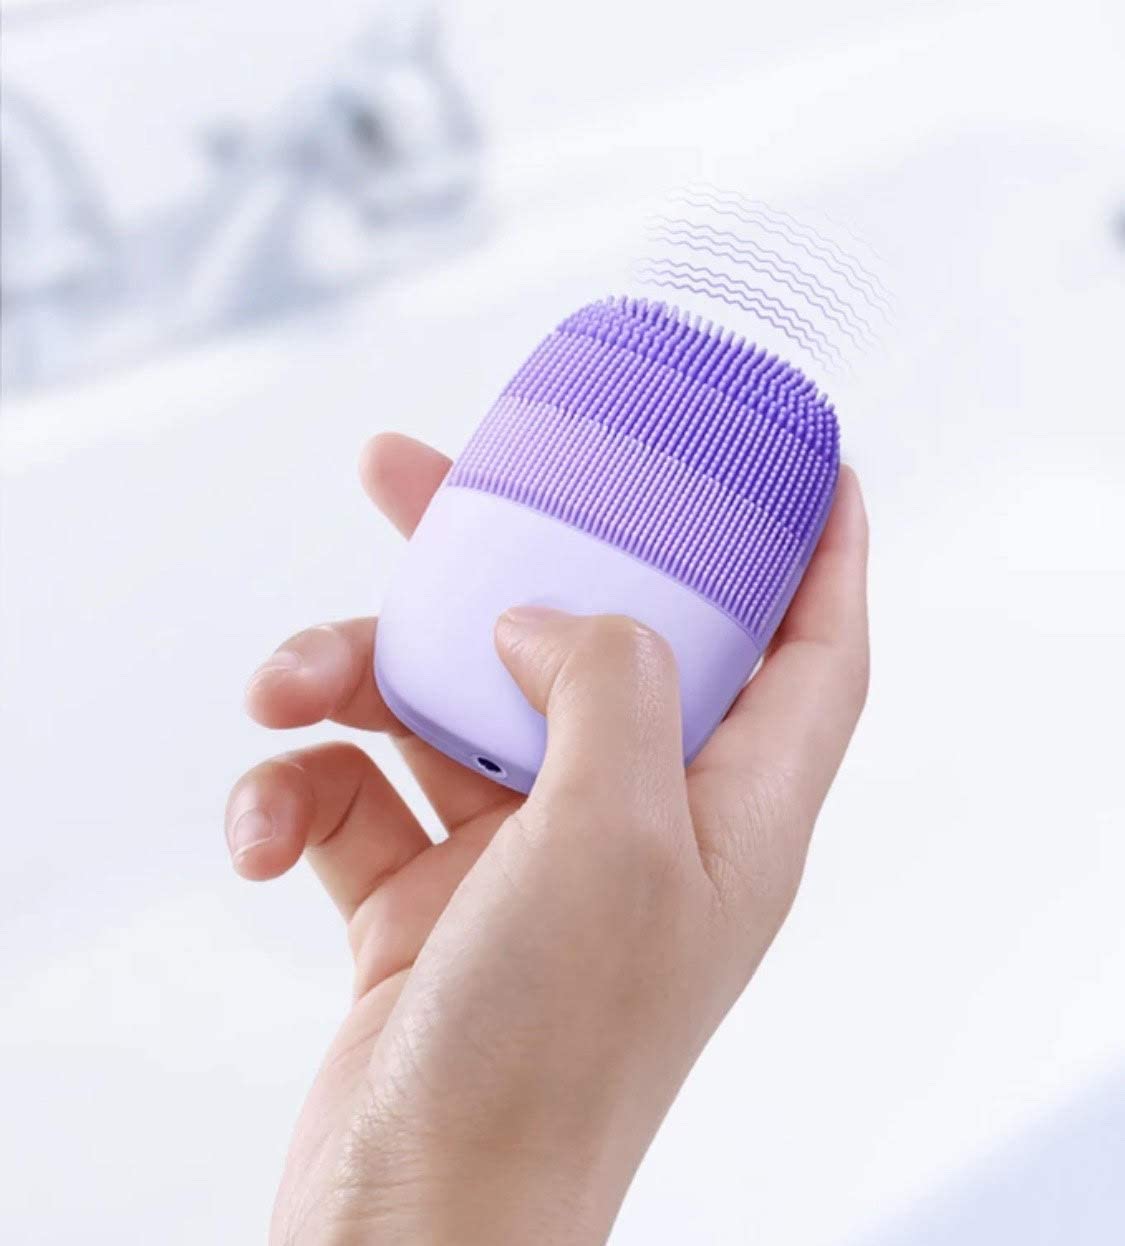 InFace Facial Cleansing Brush Face Skin Care Tools Waterproof Silicone Electric Sonic Cleanser Beauty Massager (Purple)